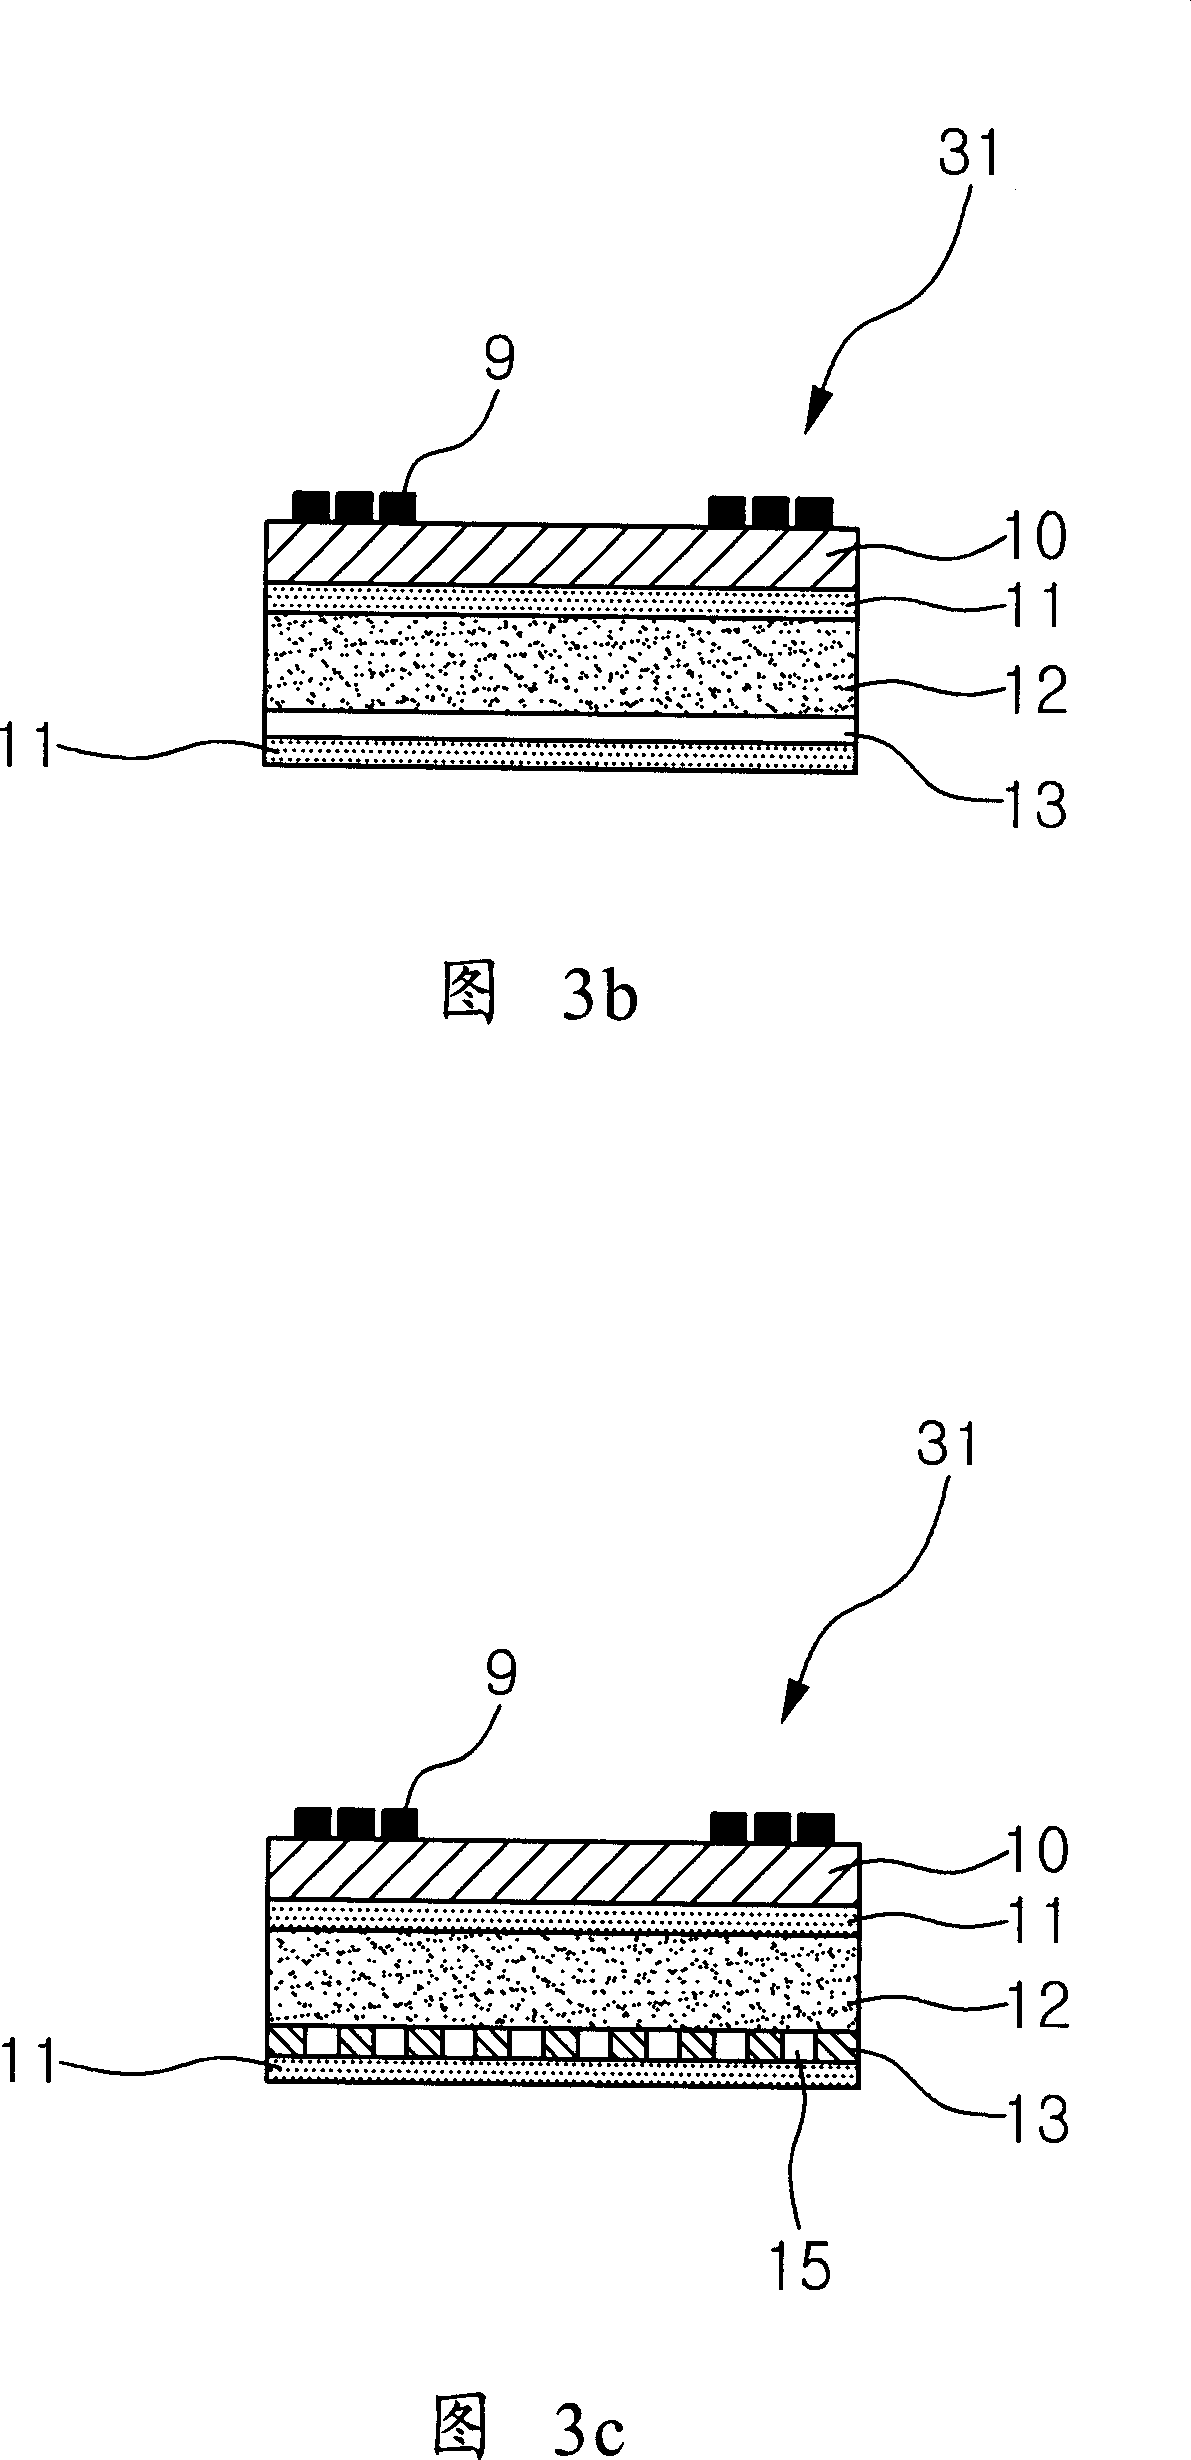 Absorber for radio-frequency identificating antenna, preparation method thereof and radio-frequency identificating antenna using the same